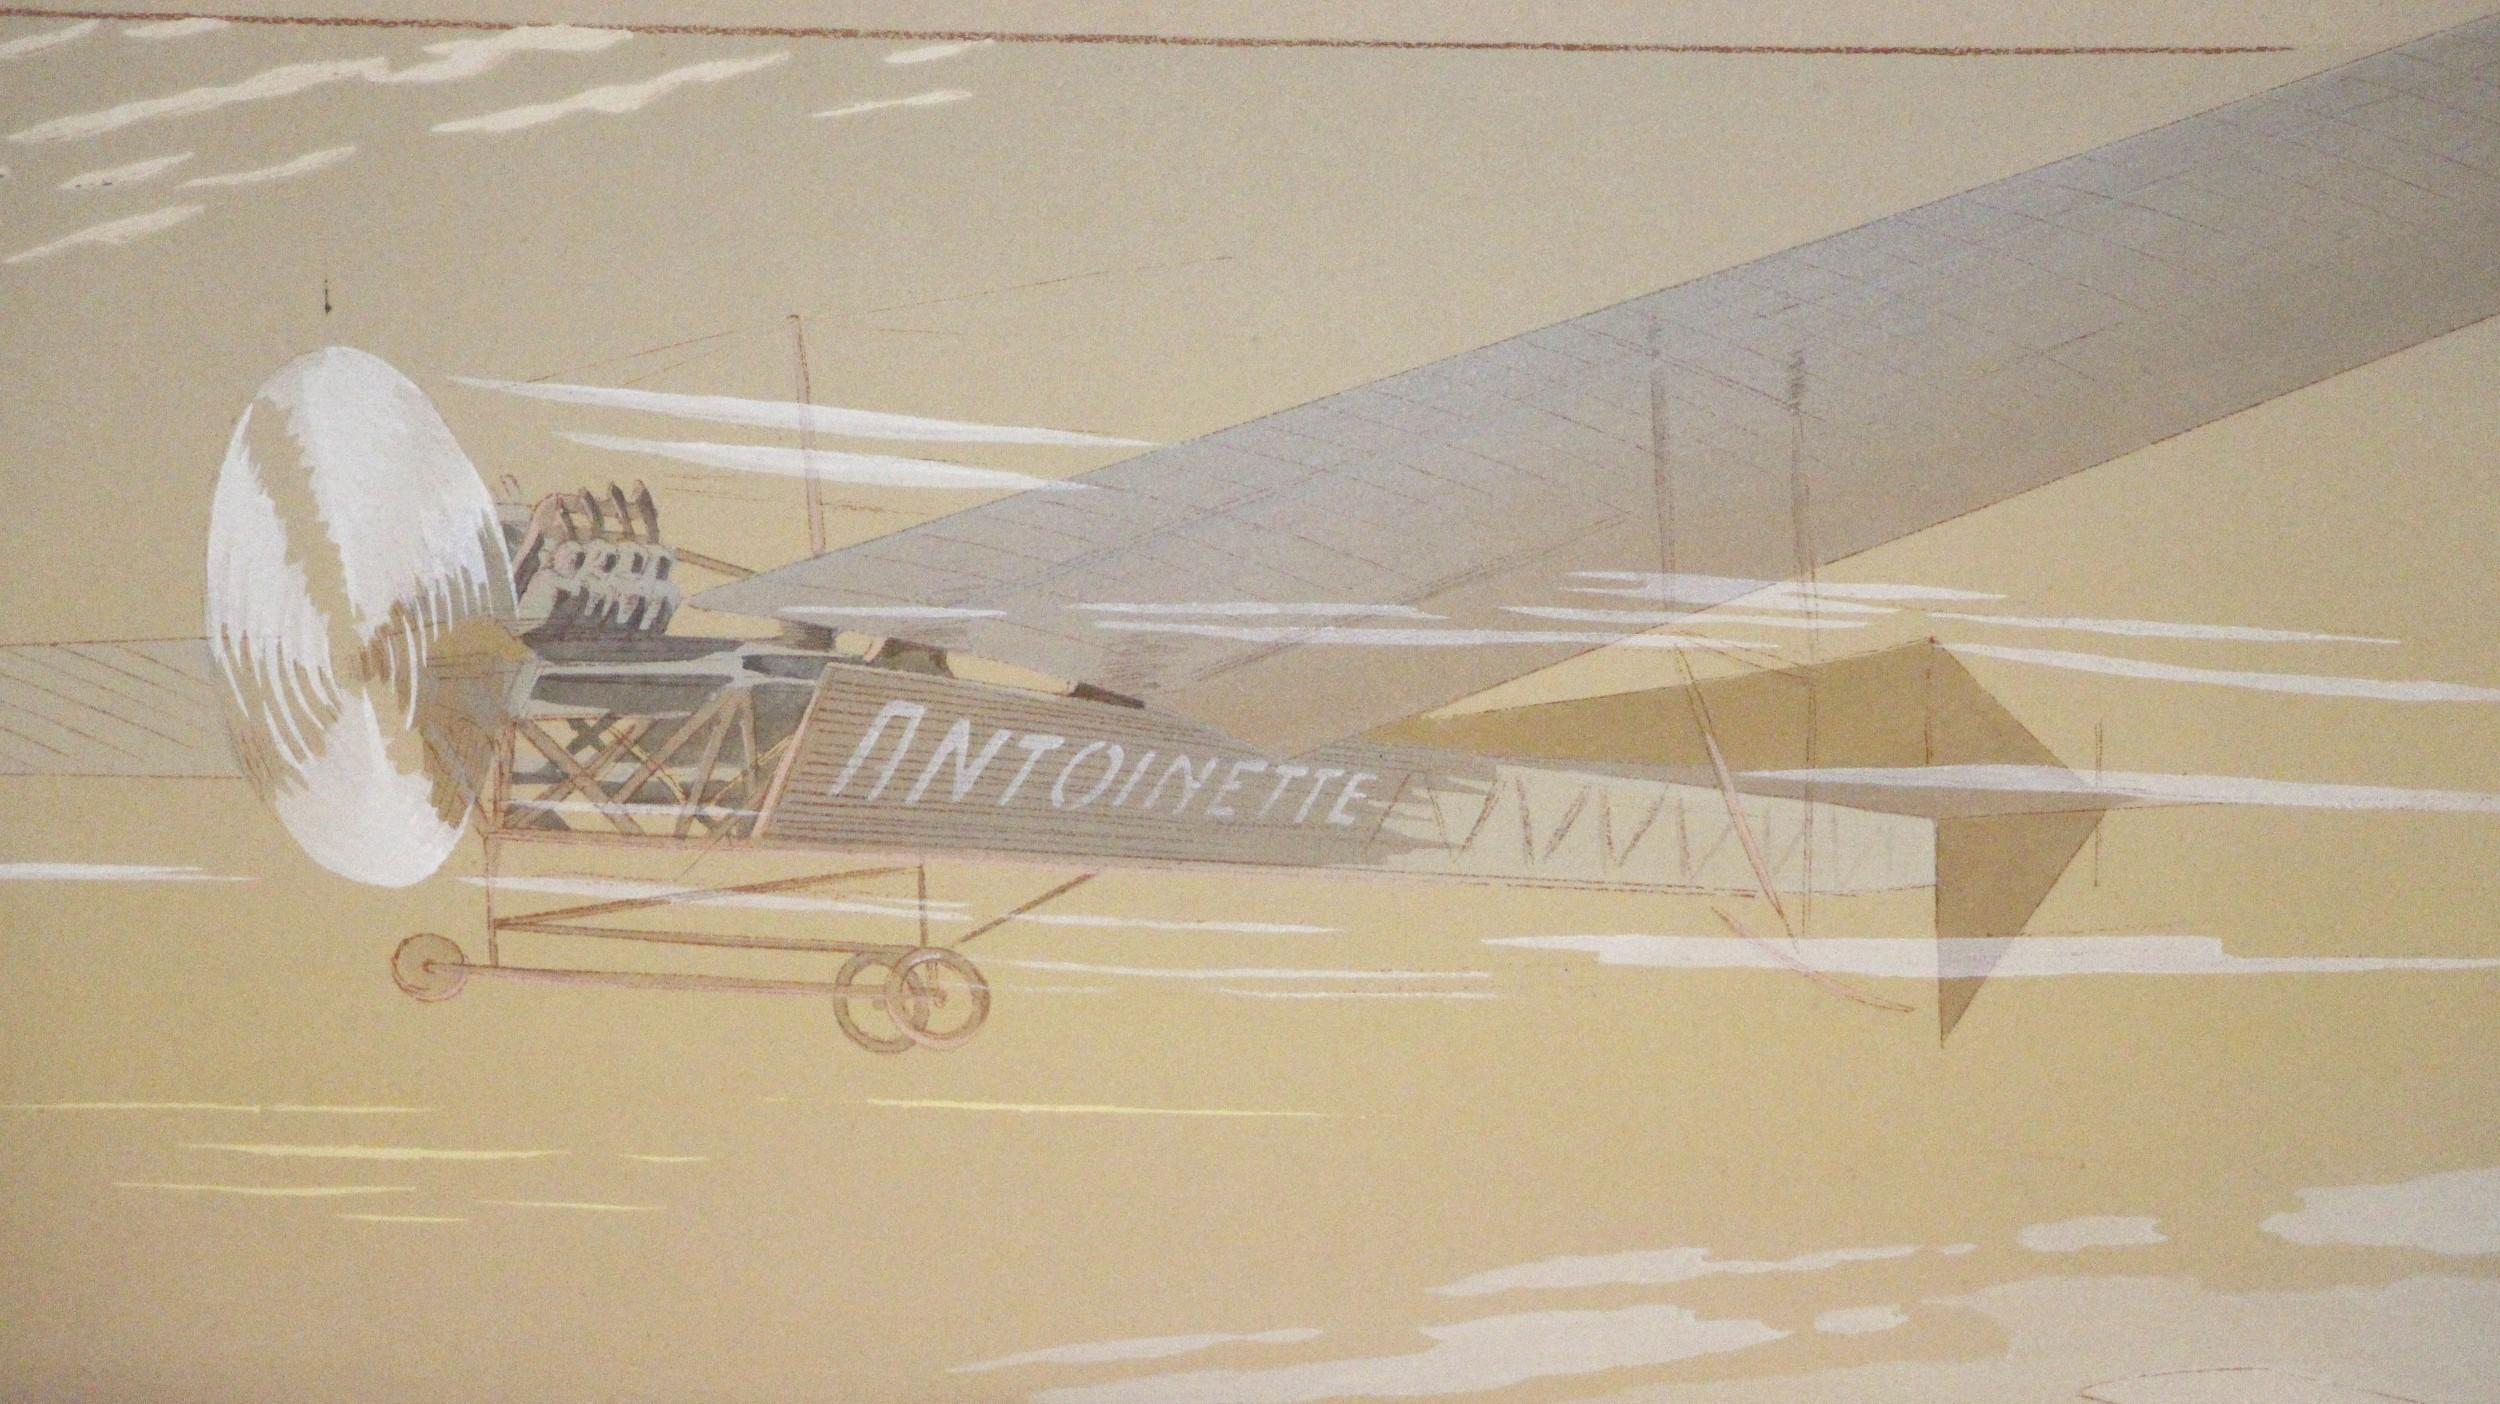  French Lithograph Latham on Antoinette Monoplane Framed Signed E. Montaut In Good Condition For Sale In New York, NY